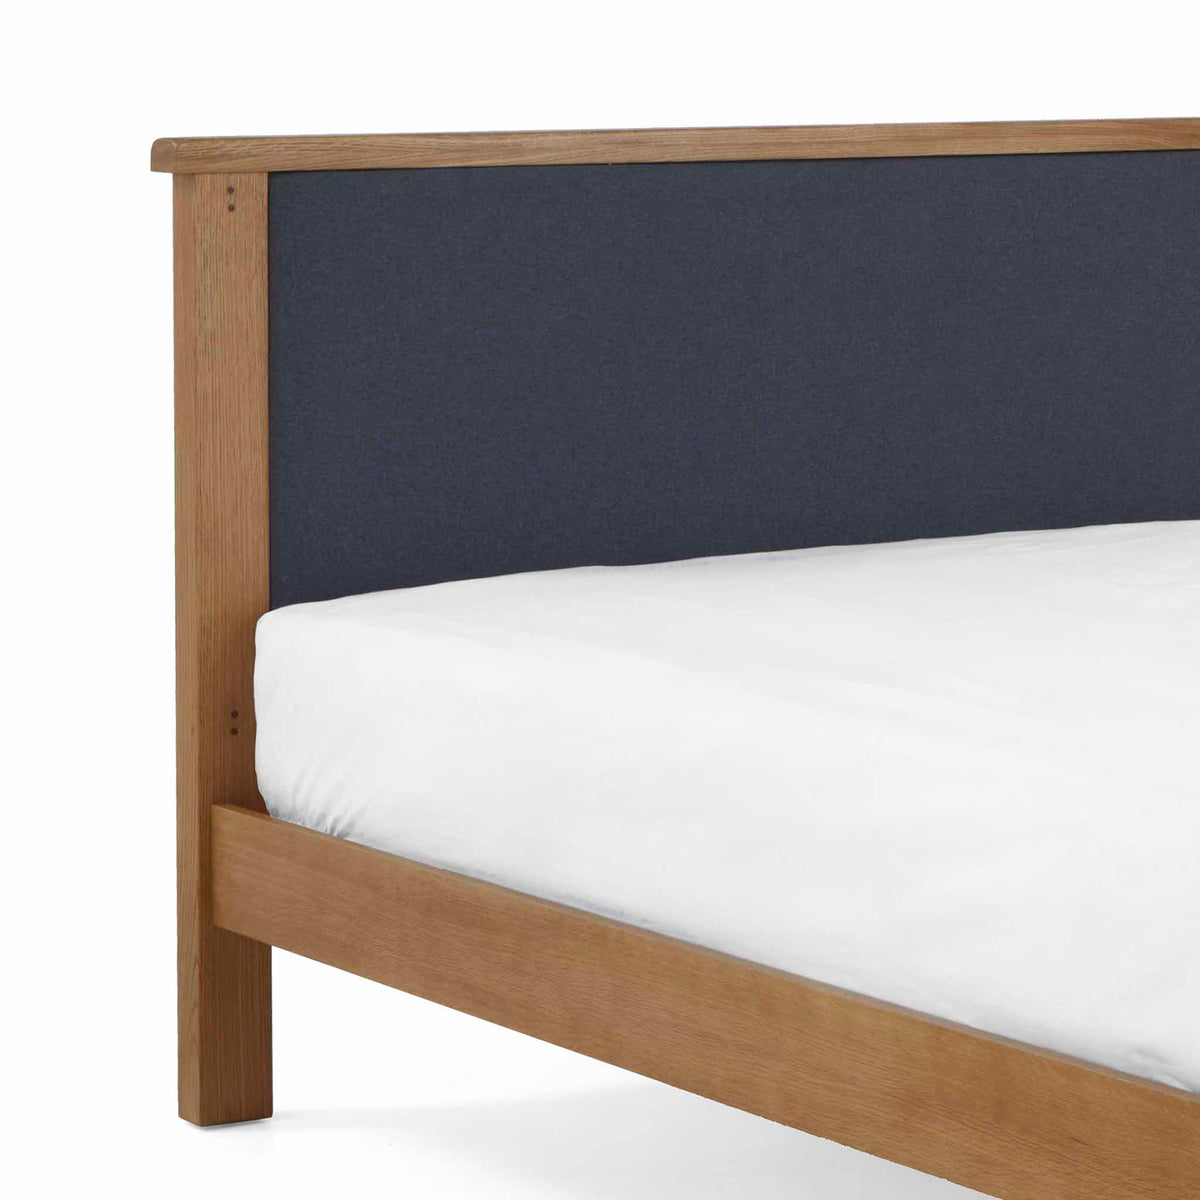 side view of headboard with wooden frame